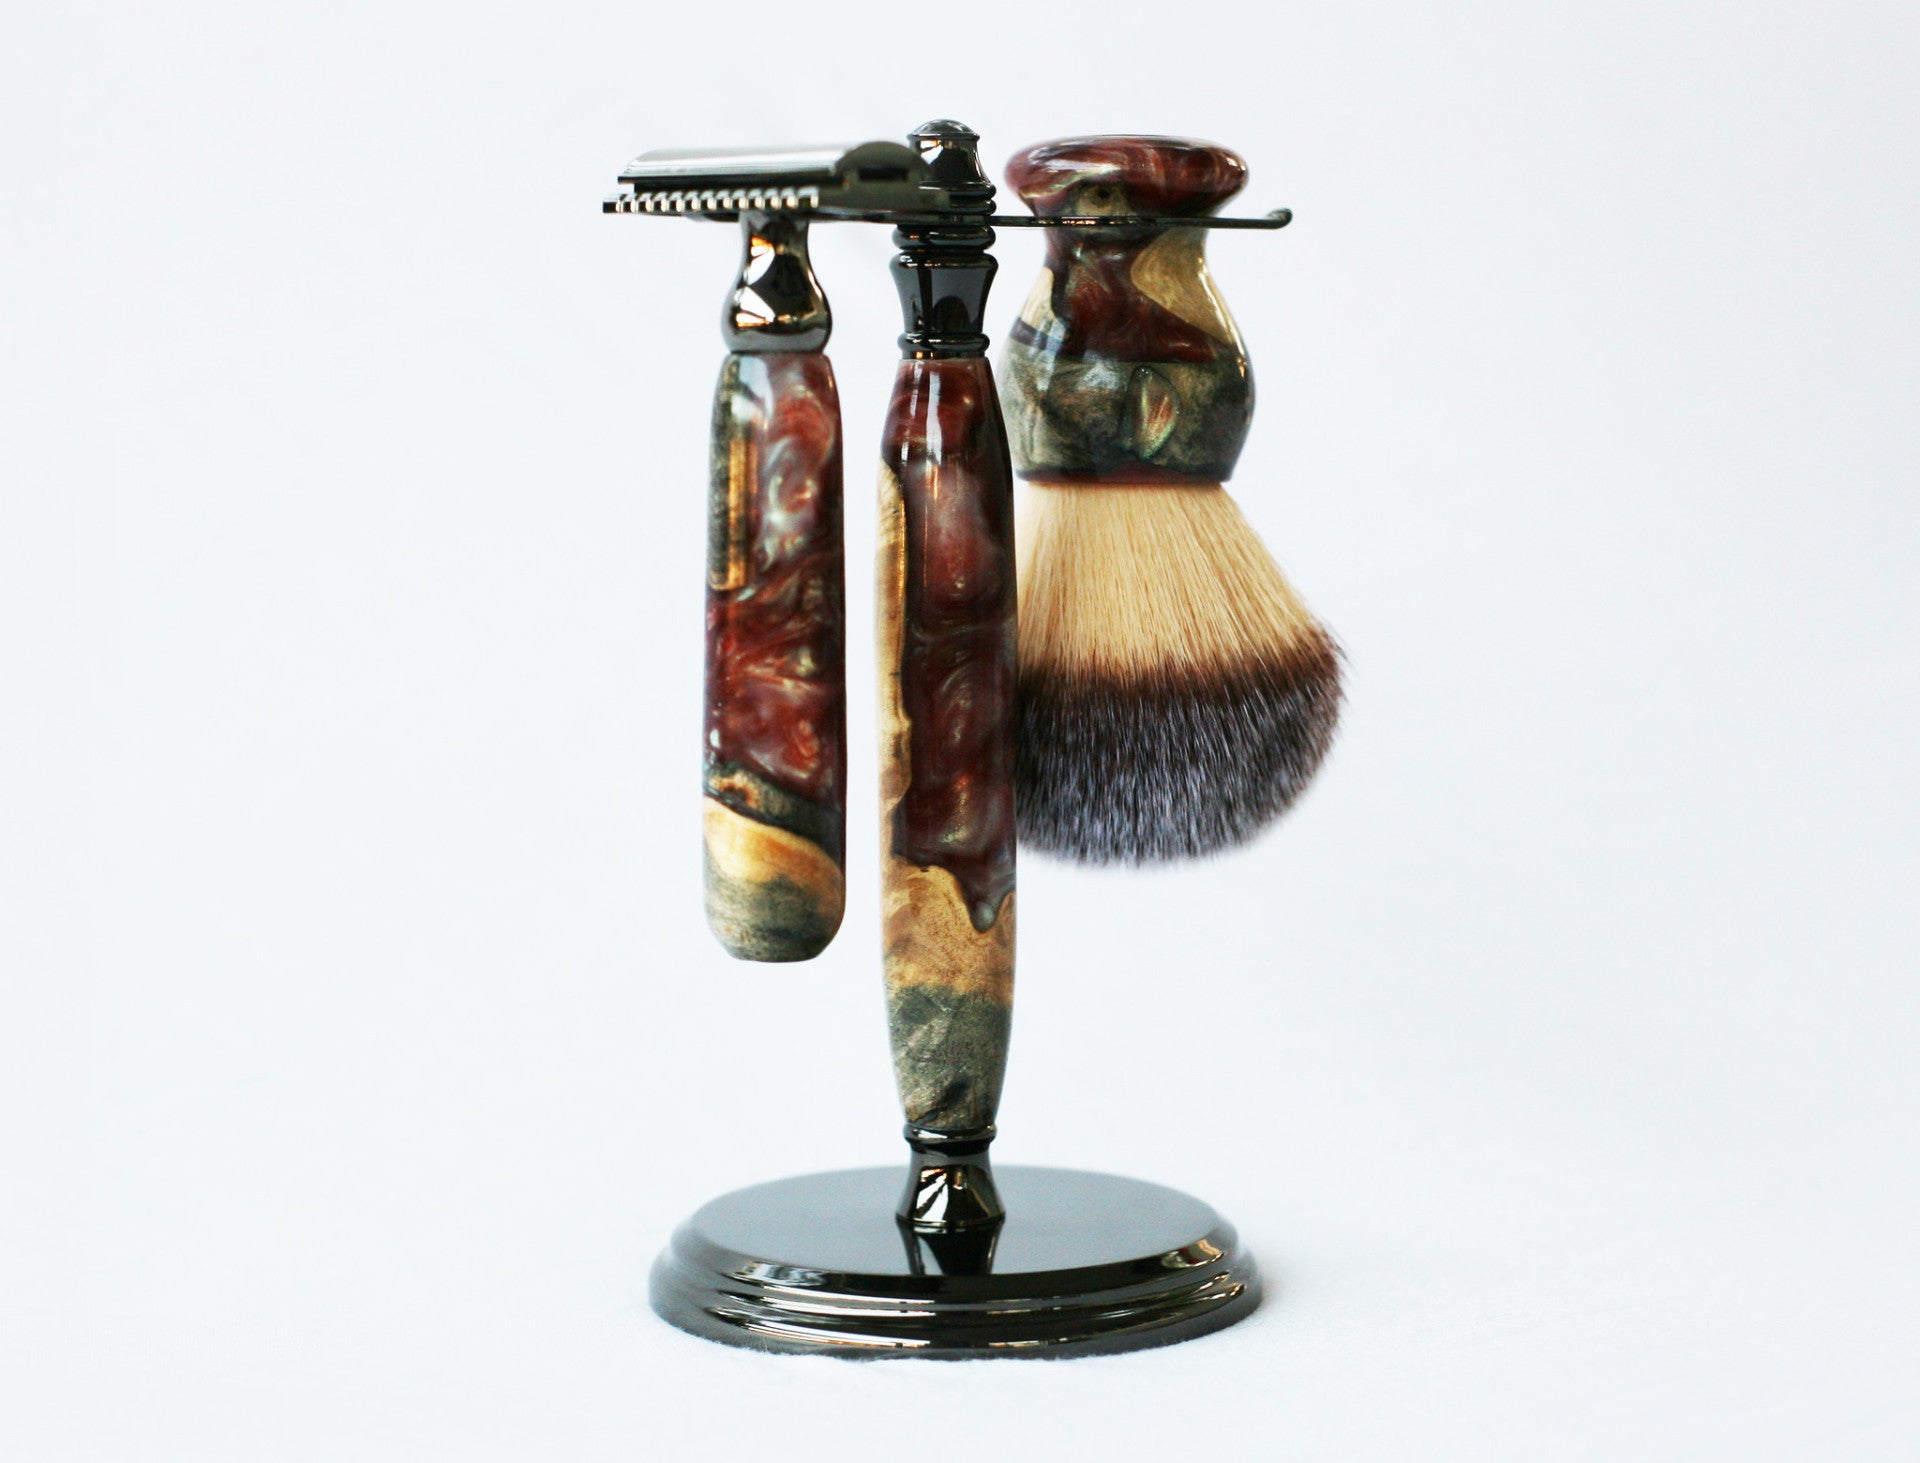 Buckeye Burl Shave Set with 'Chameleon' Resin safety razor, 26mm lather brush and a matching shave stand. - CreationsByWill